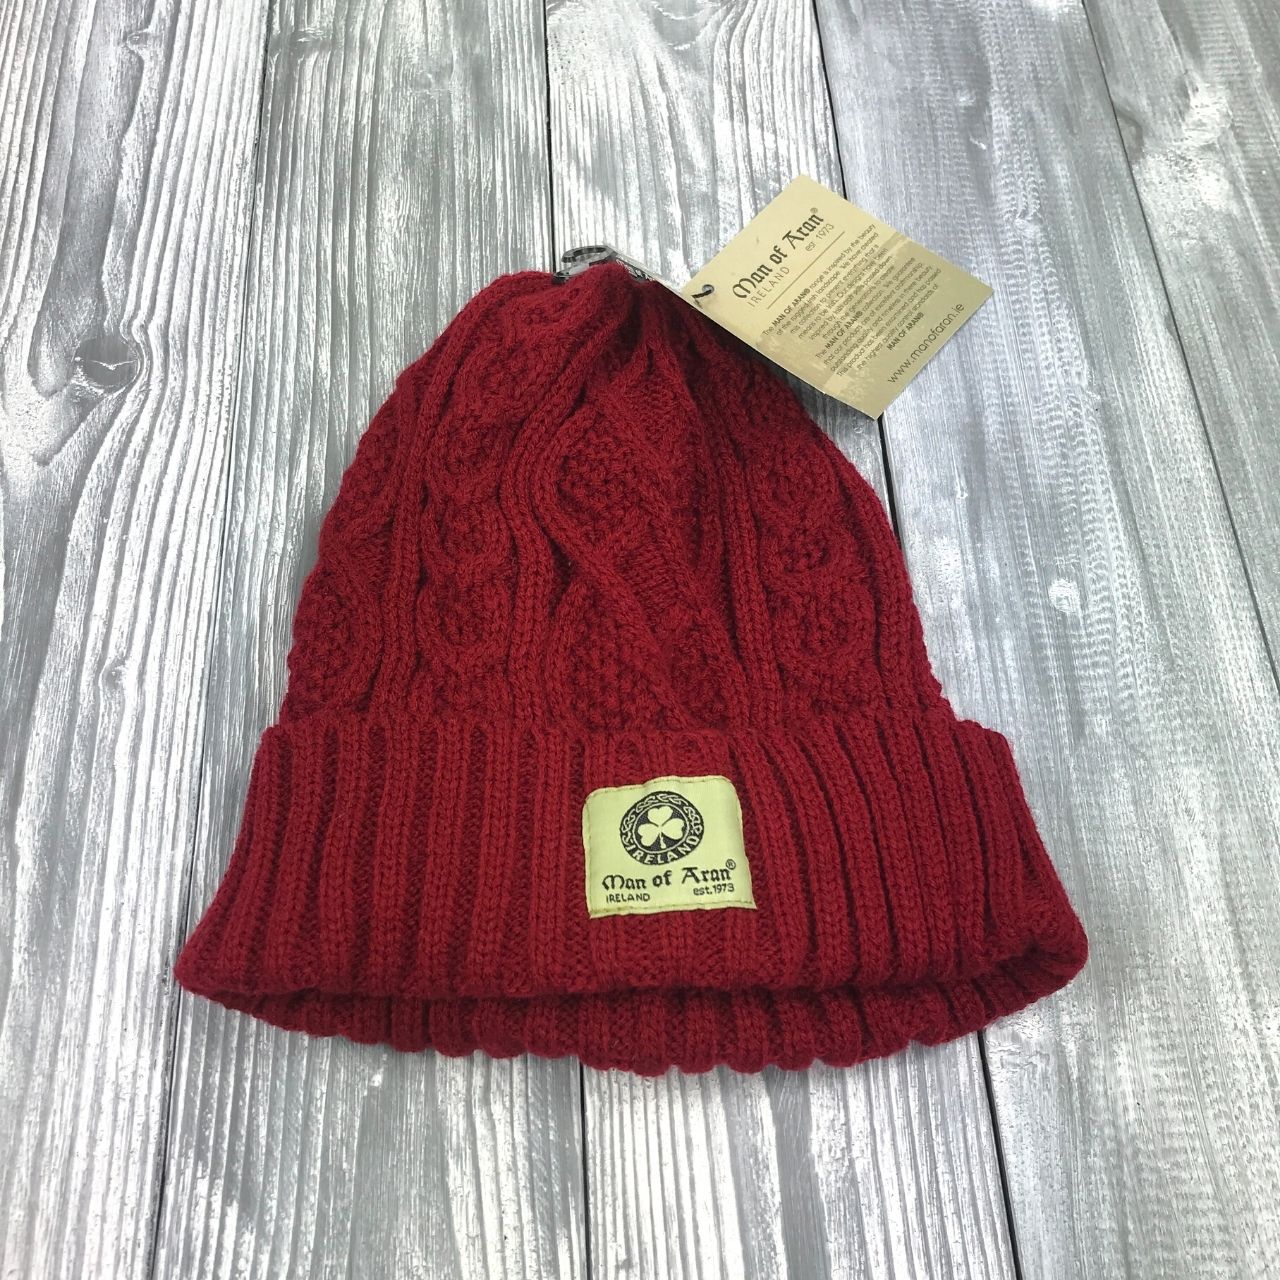 Man of Aran Lambay Beanie - Maroon  Man of Aran range is inspired by the beauty of the rugged Irish Landscape. We have created this collection to present everything that it means to be Irish. Our designs have been inspired by Irish craft skills passed down through generations to create.